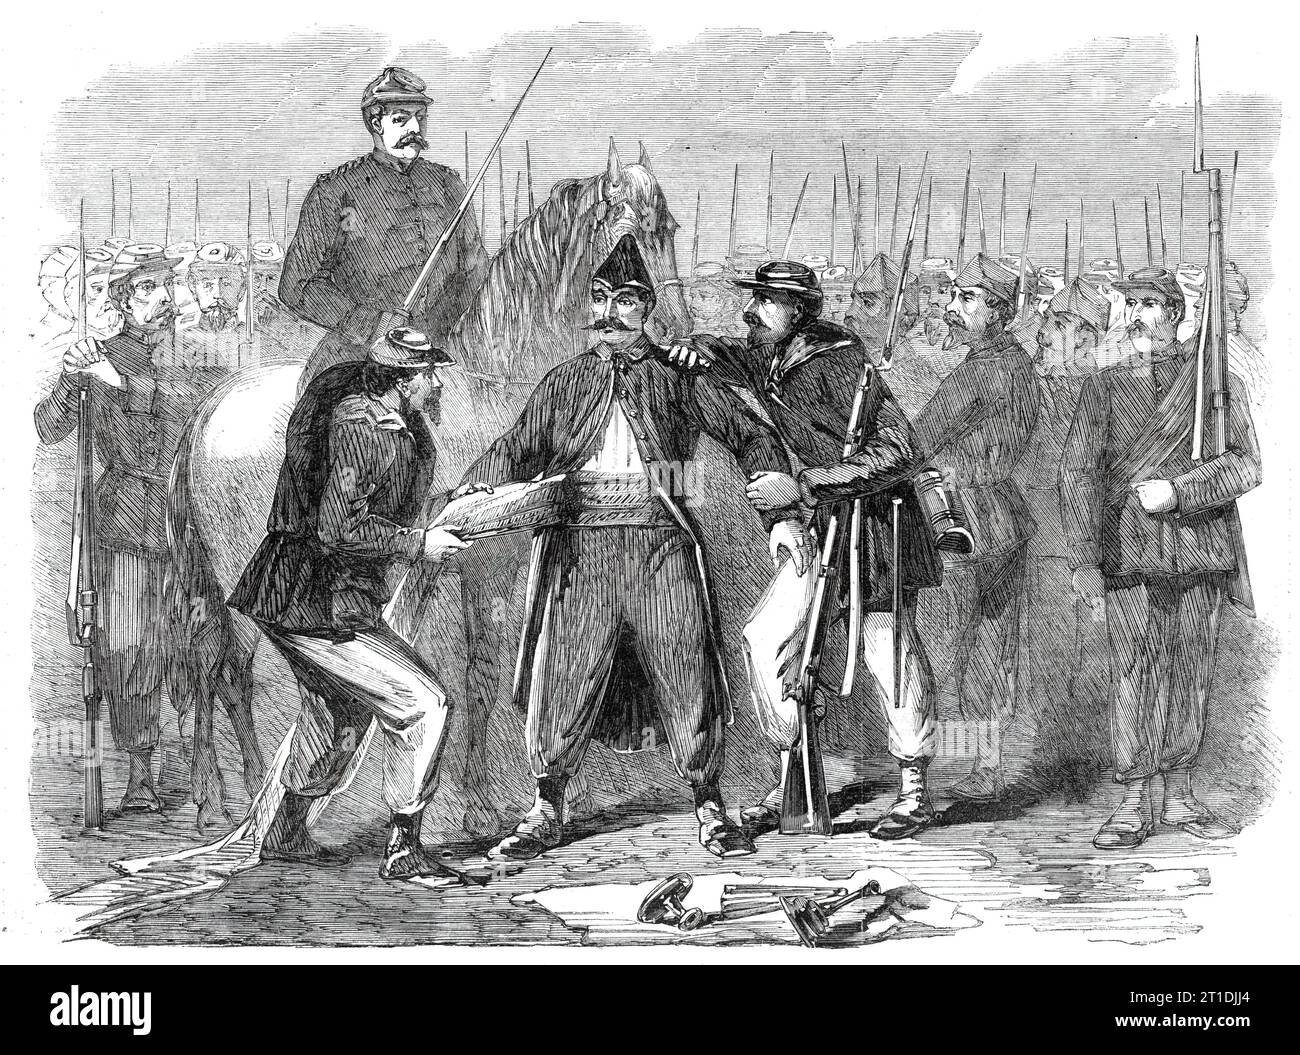 Searching Neapolitan prisoners at St. Angelo - from a sketch by our special artist, Frank Vizetelly, 1860. War in Italy. 'A party of prisoners taken by Bixio's division in the engagement of the 1st October were recognised as belonging to the Neapolitan troops who some days previously had committed all kinds of atrocities at Cajazzo, which place was sacked. Bixio gave orders to have them searched, and that all those who had plunder on them should be shot. From some were taken earrings with flesh still hanging to them; others had ornaments taken from the altar of the church; and several were swa Stock Photo